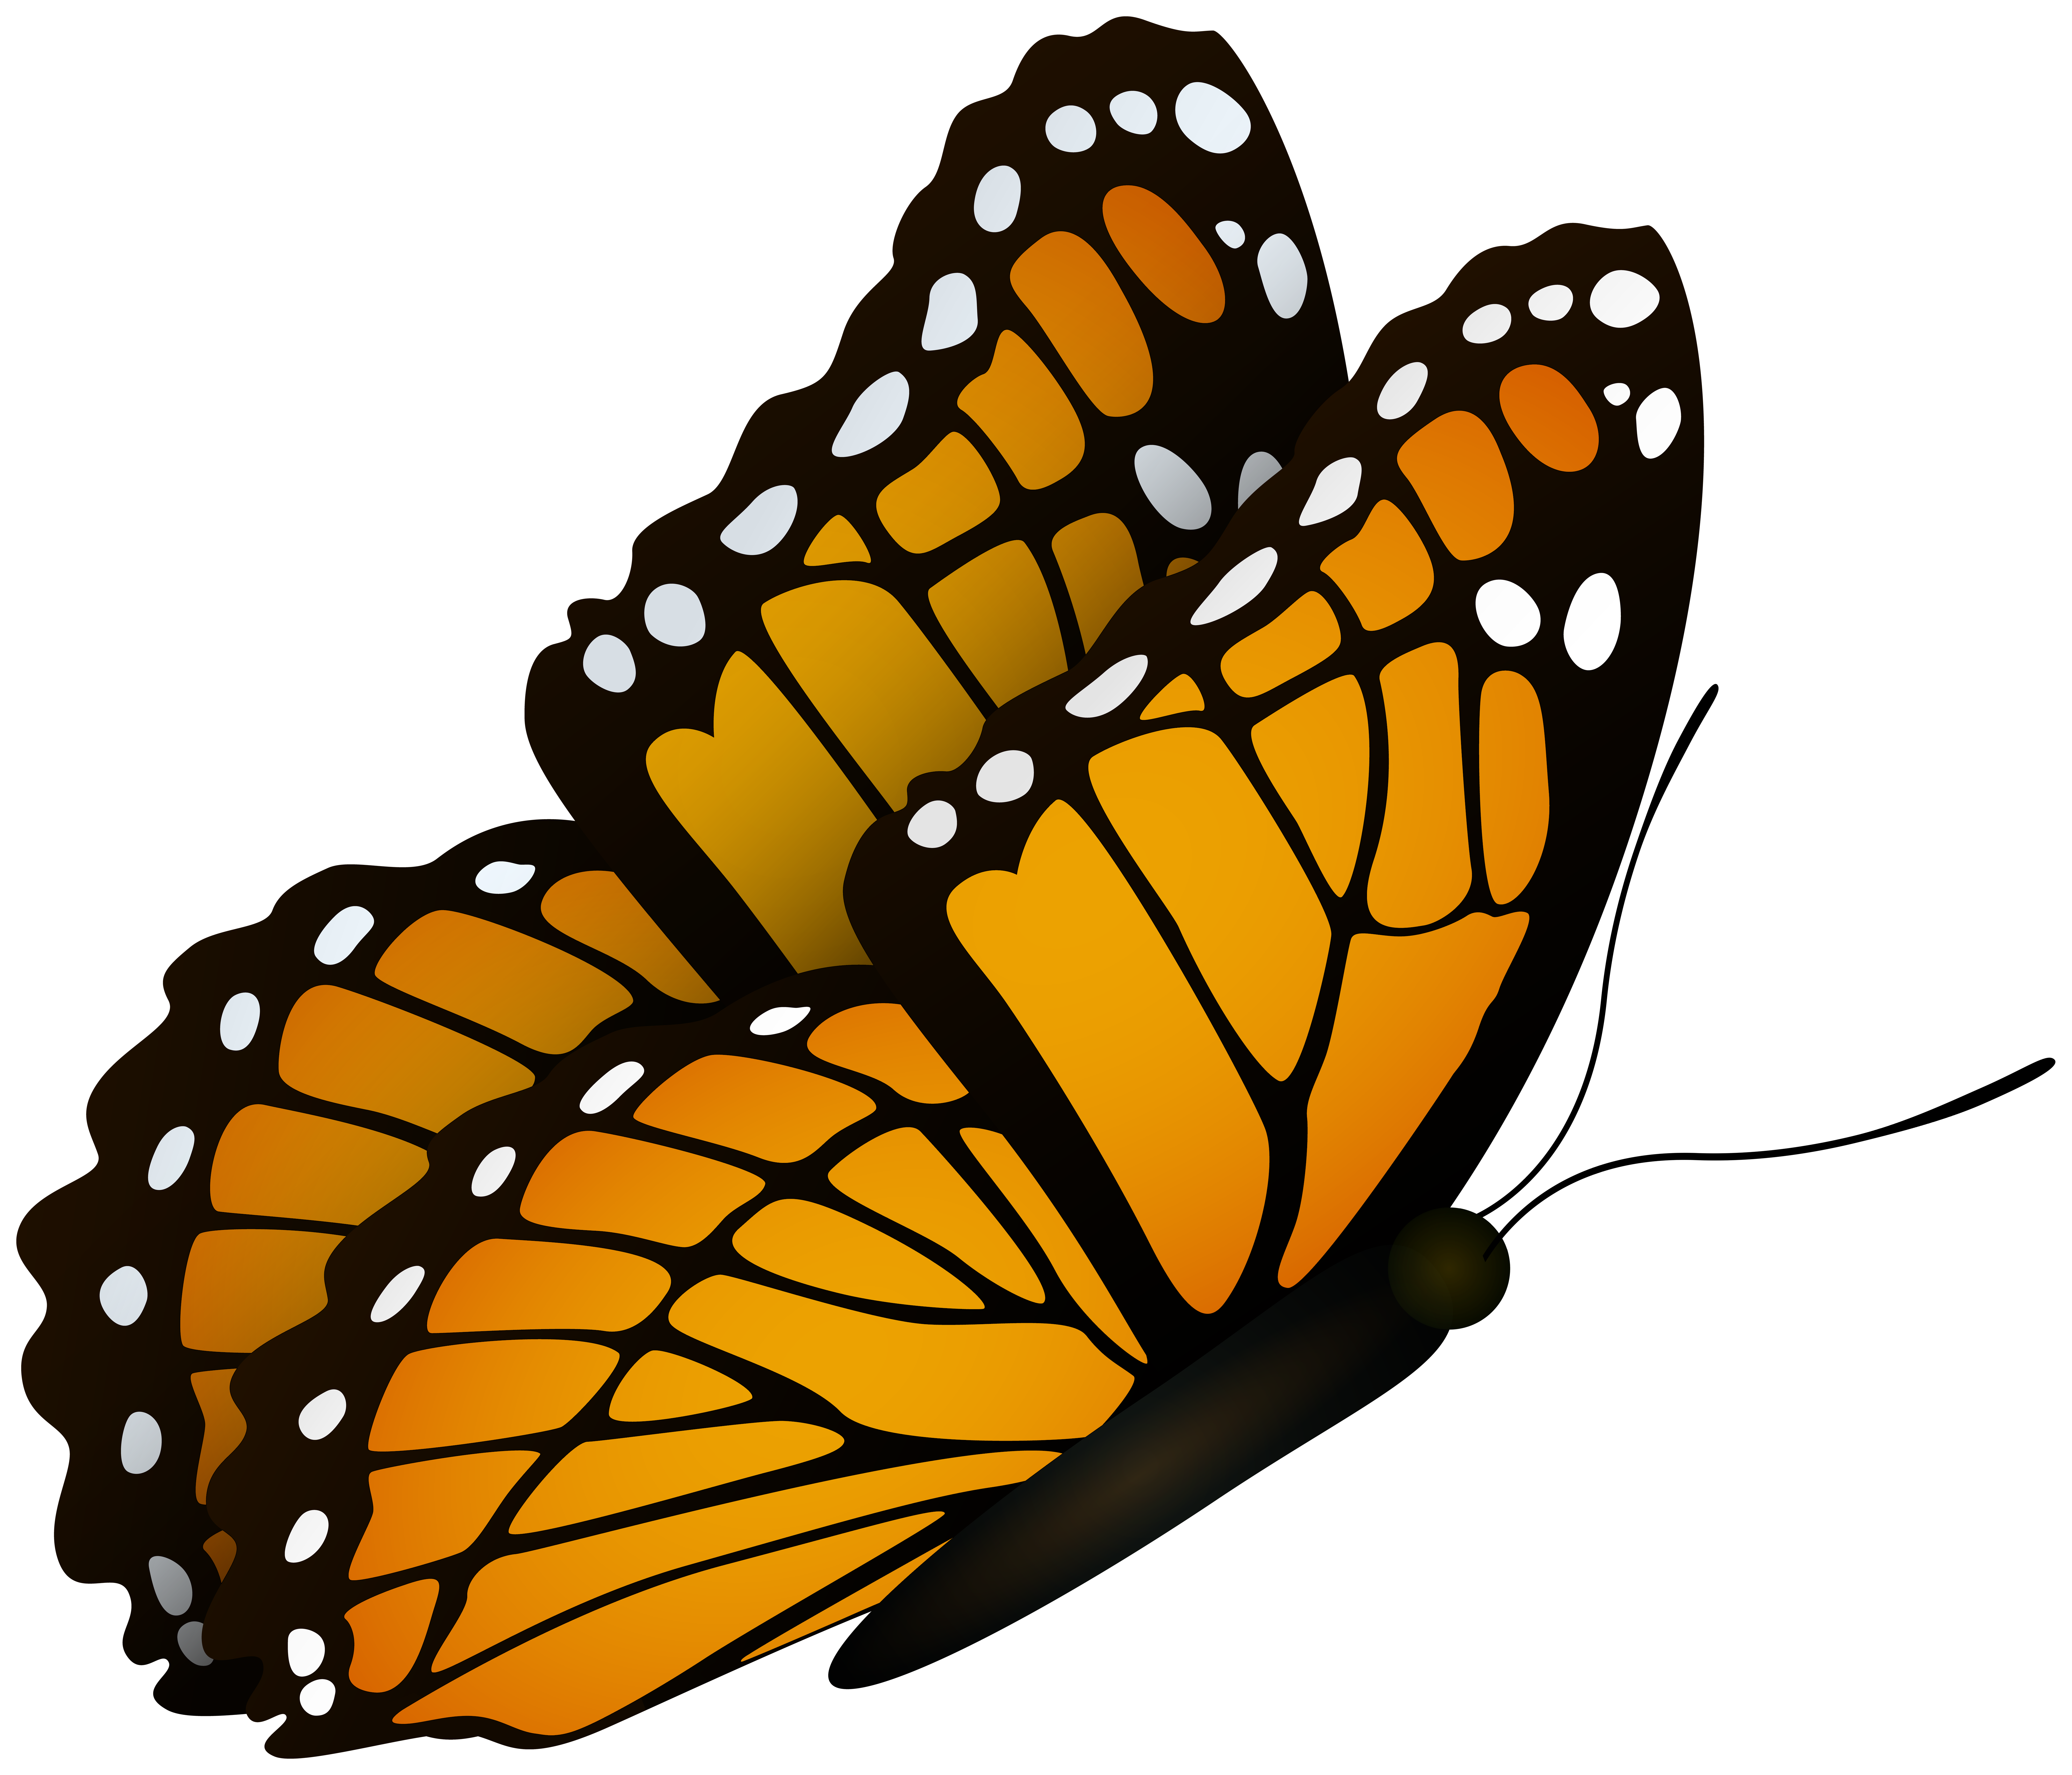 https://gallery.yopriceville.com/var/albums/Free-Clipart-Pictures/Butterflies-PNG/Flying_Butterfly_Clipart_Image.png?m=1555550693